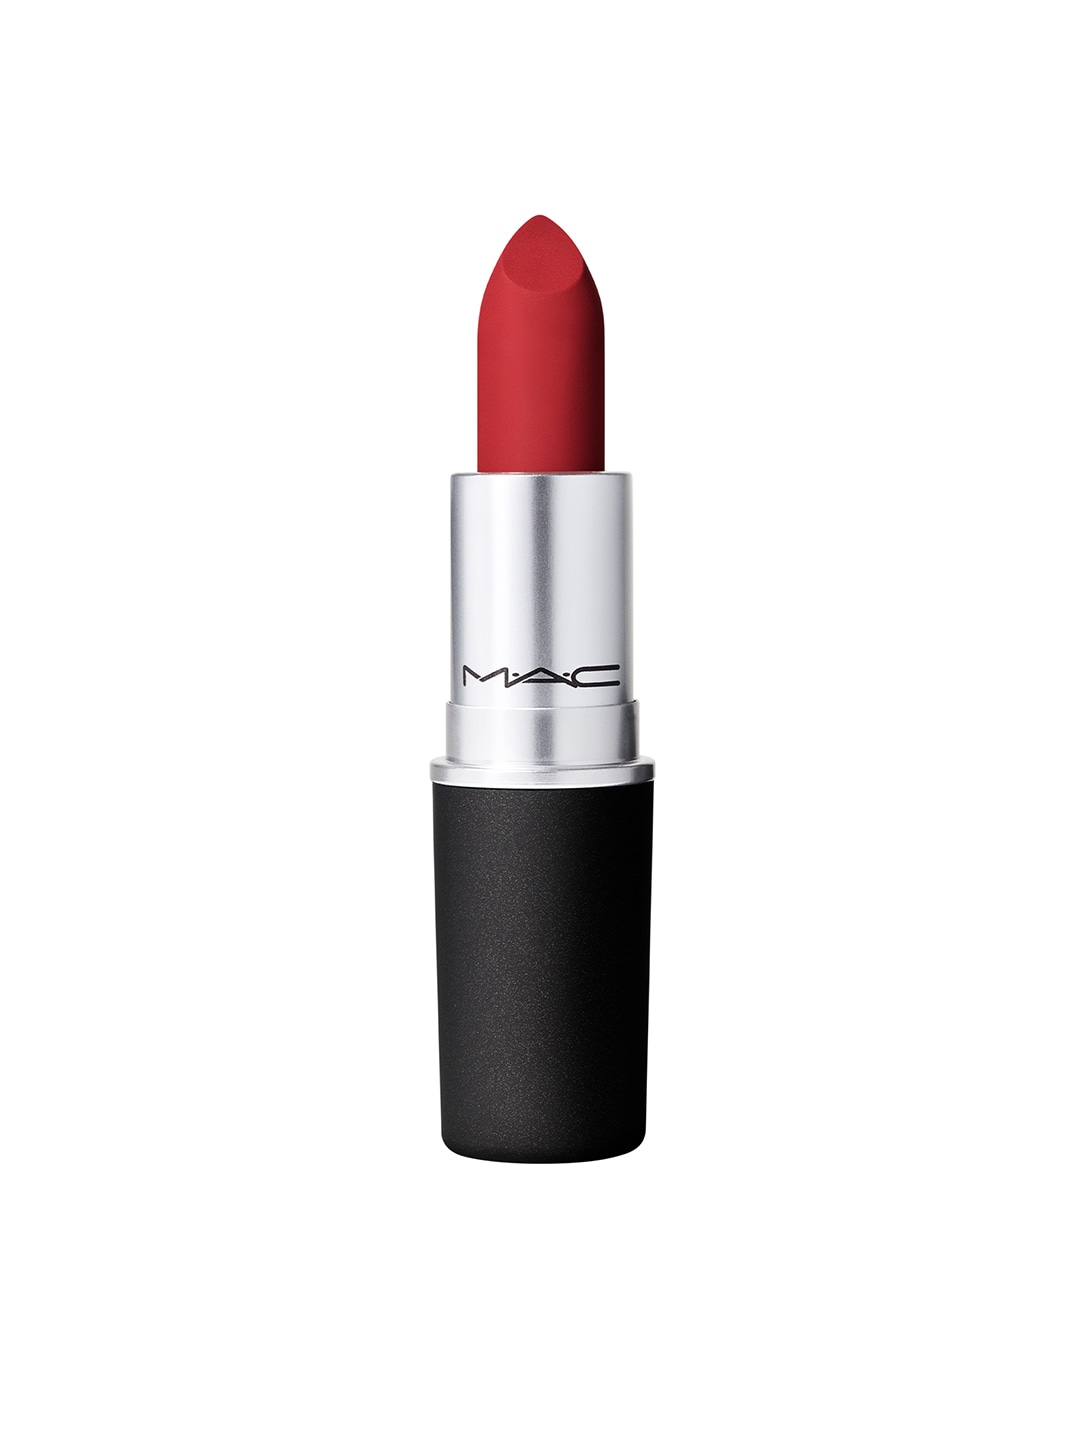 M.A.C Ruby's Crew Powder Kiss Lipstick - Ruby New 935 Price in India